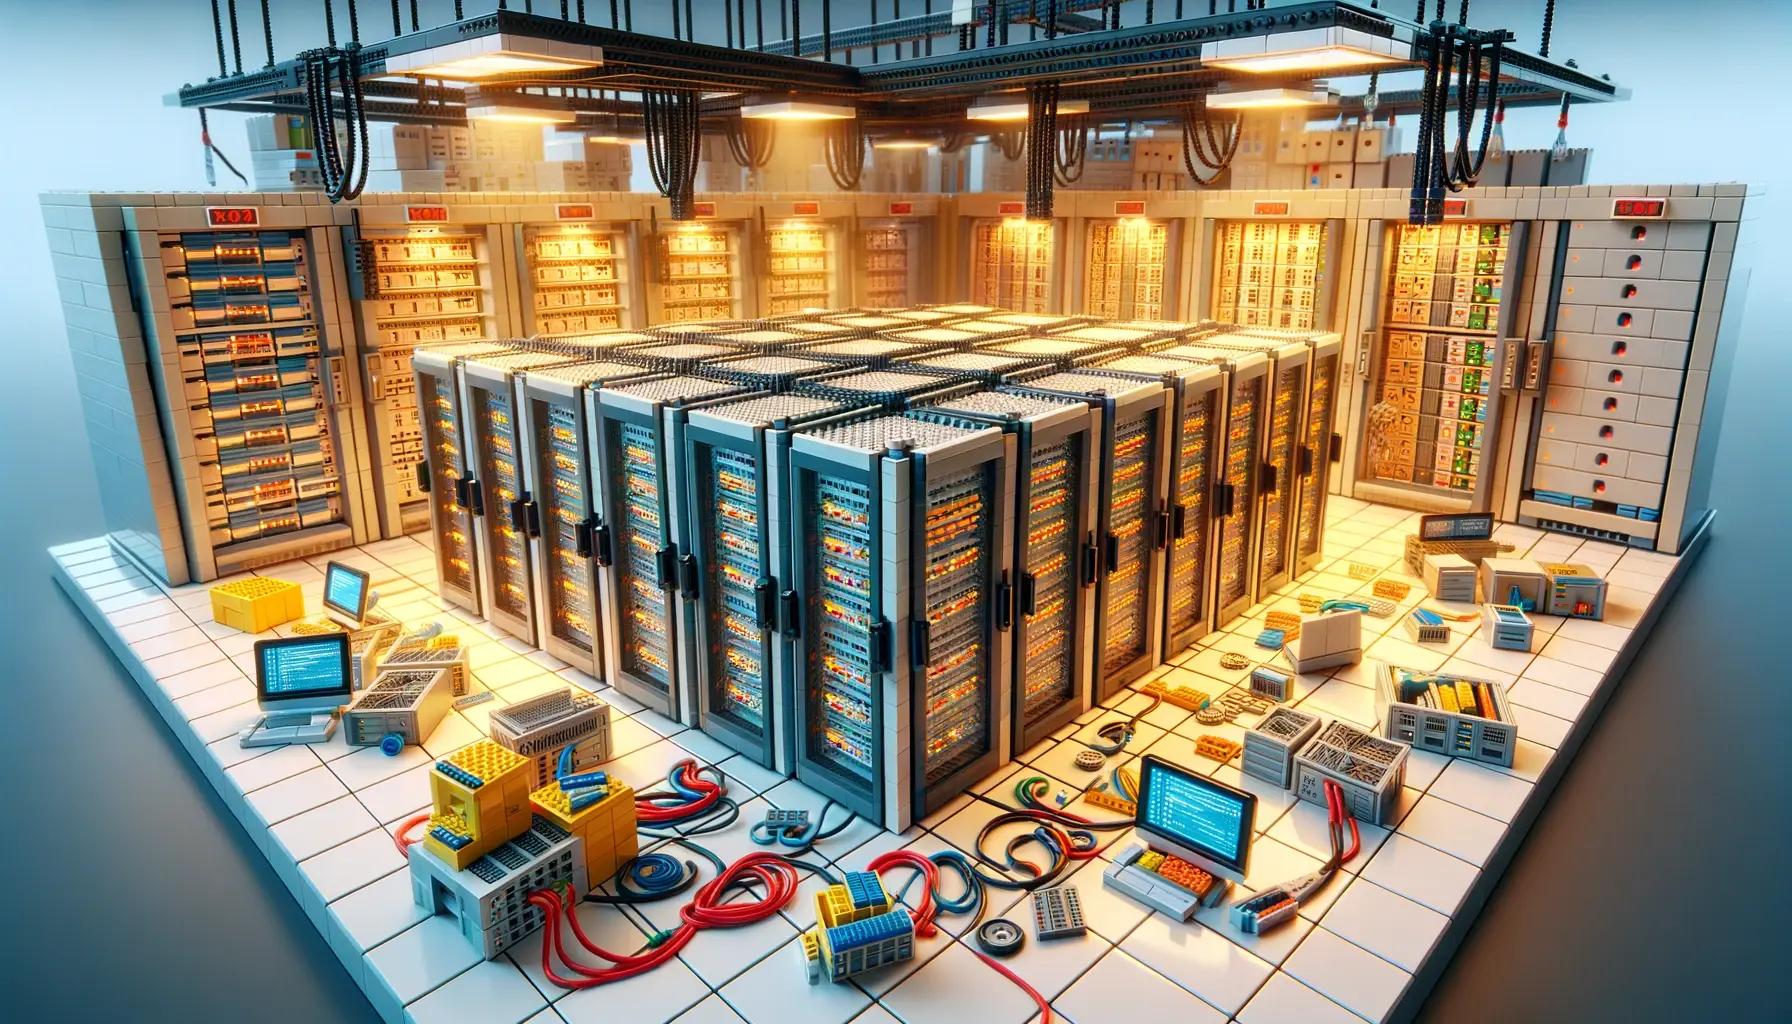 The image shows a Lego datacenter. It's a busy scene with miniature Lego computer storage units, servers, and network components.